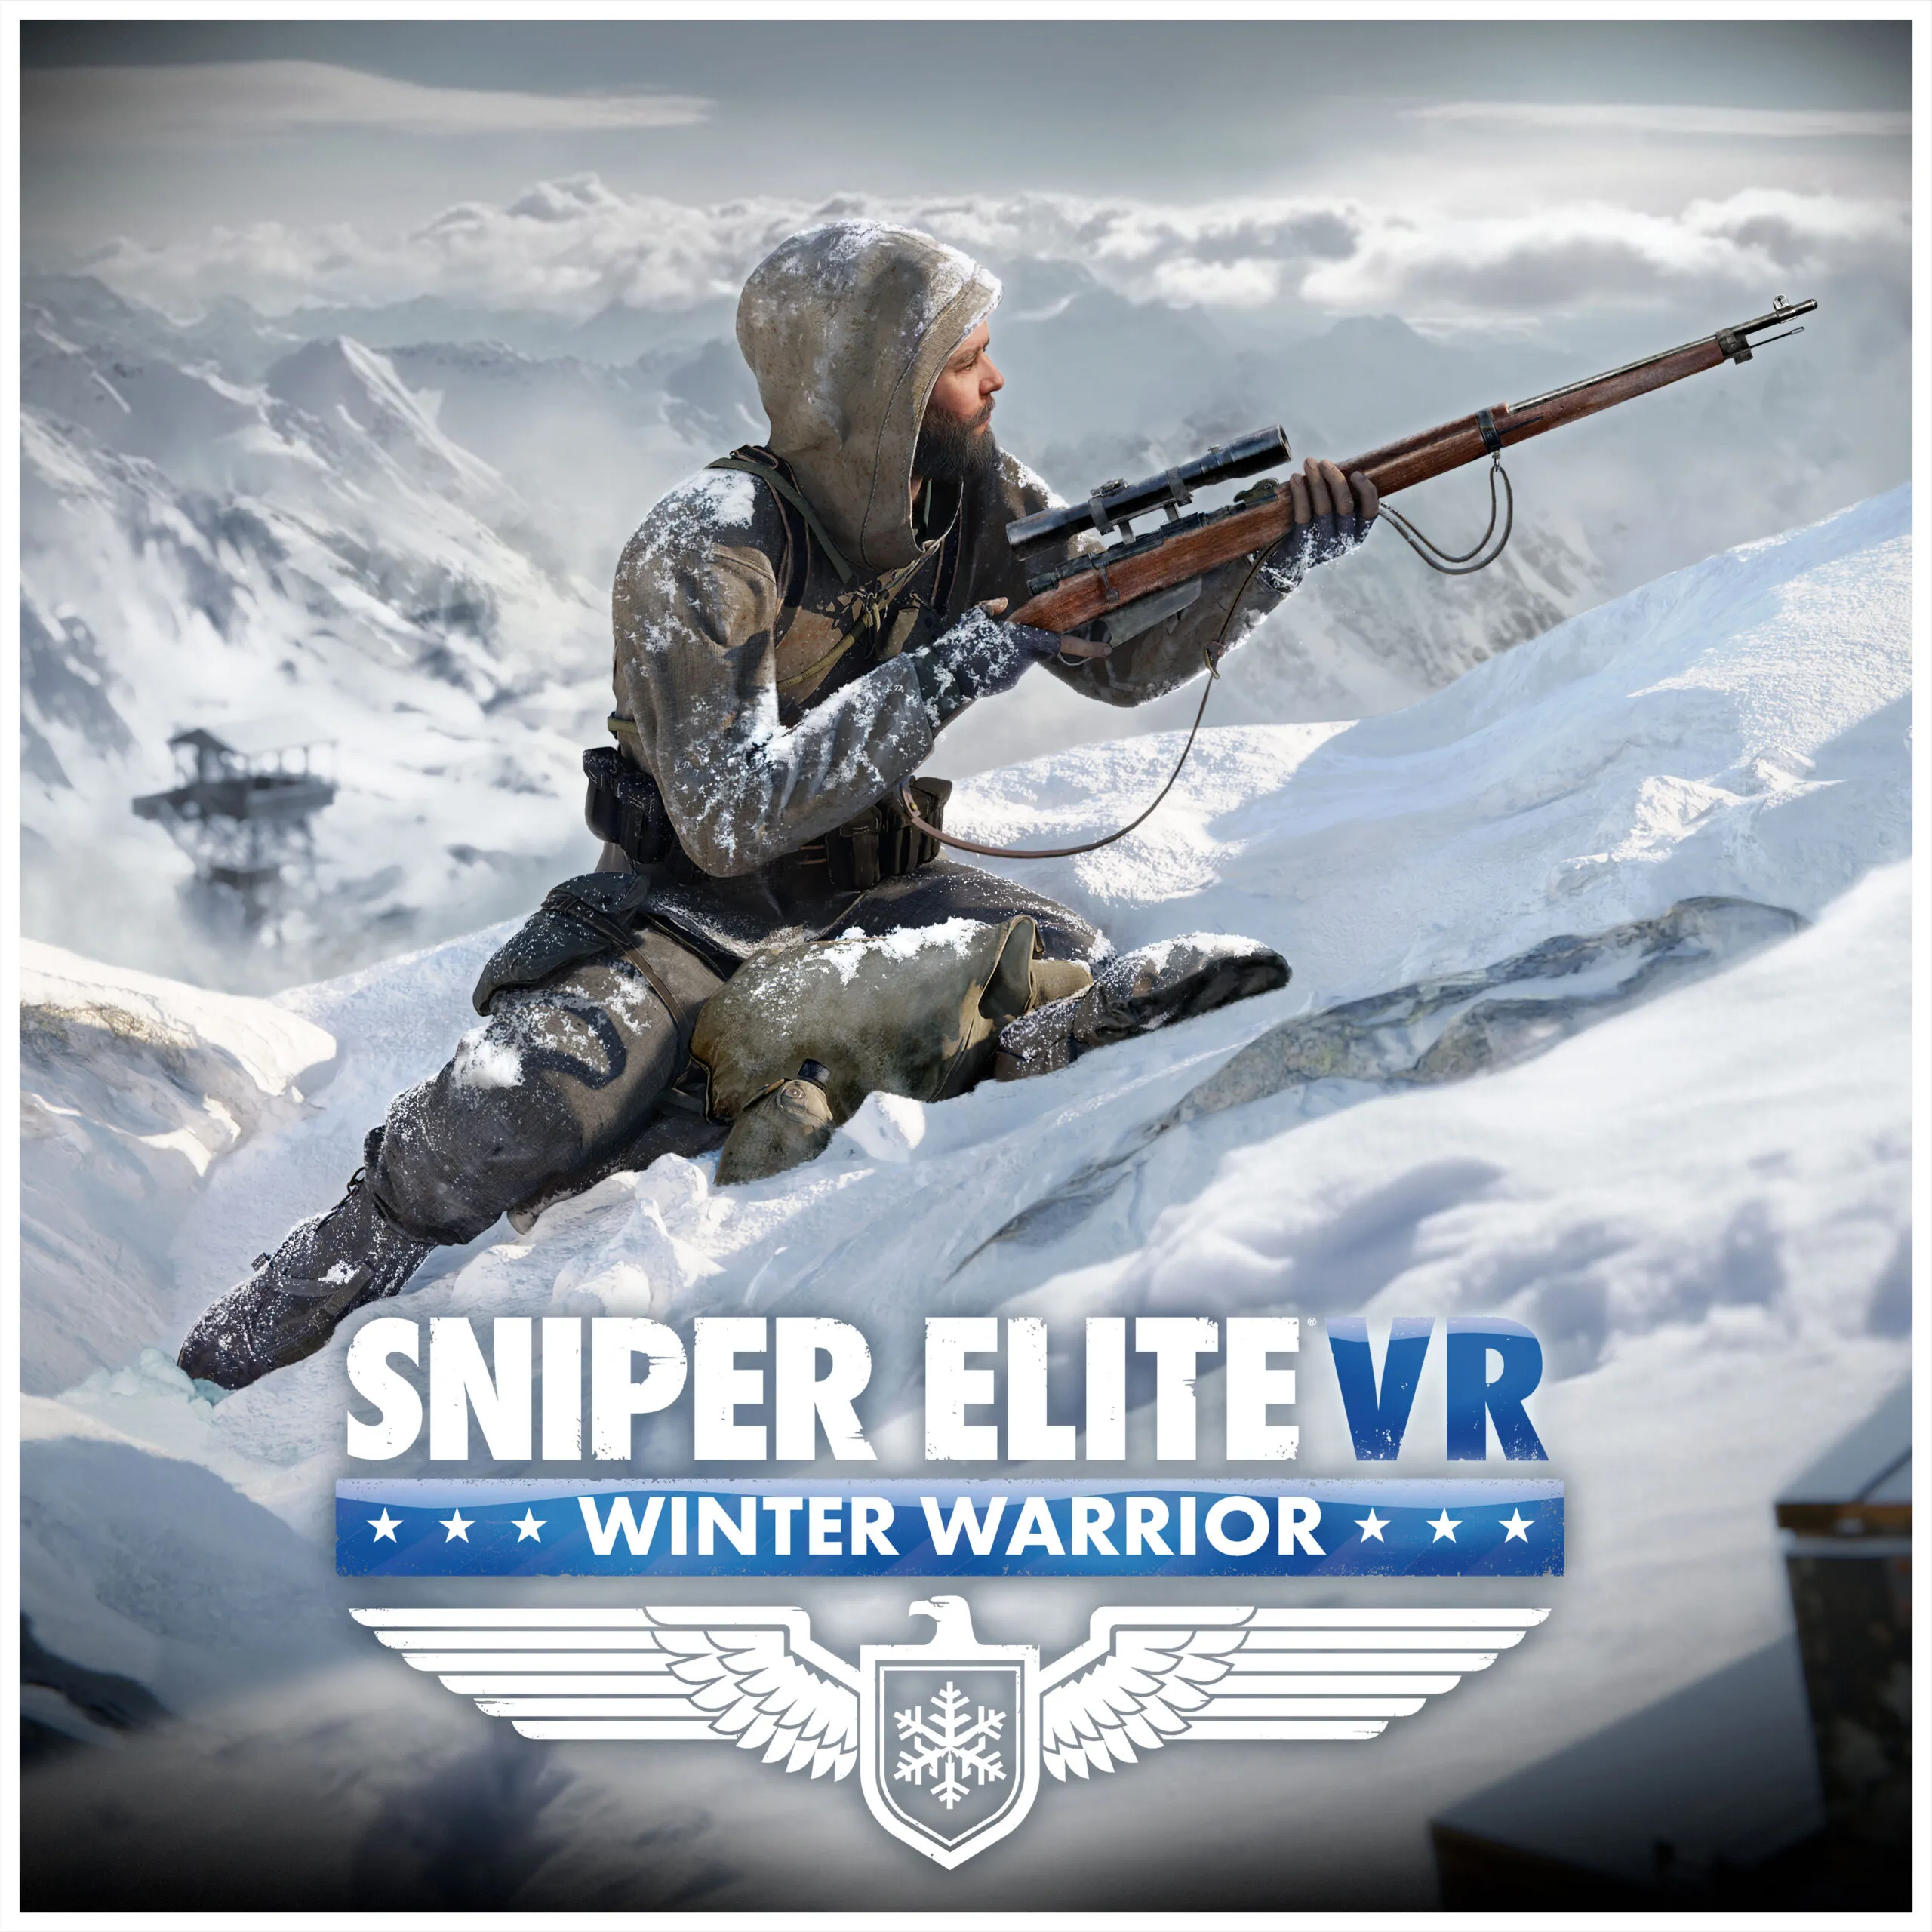 Sniper Elite VR: Winter Warrior  | Coming soon to Meta Quest 2, 3 and Pro.